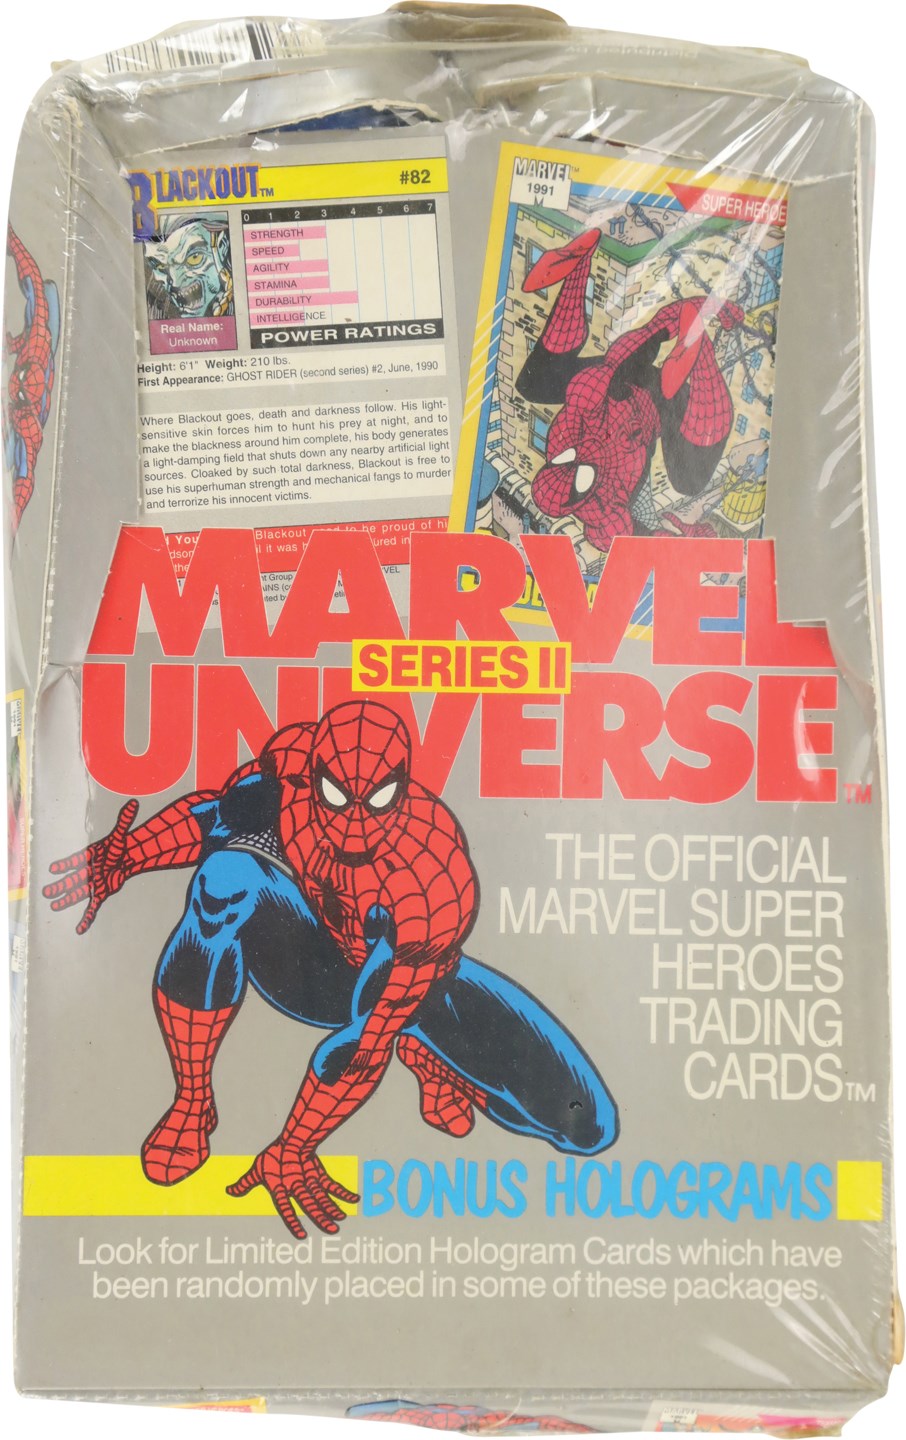 Unopened Boxes, Packs And Cases - 1990 Impel Marvel Universe Series II Sealed Wax Box